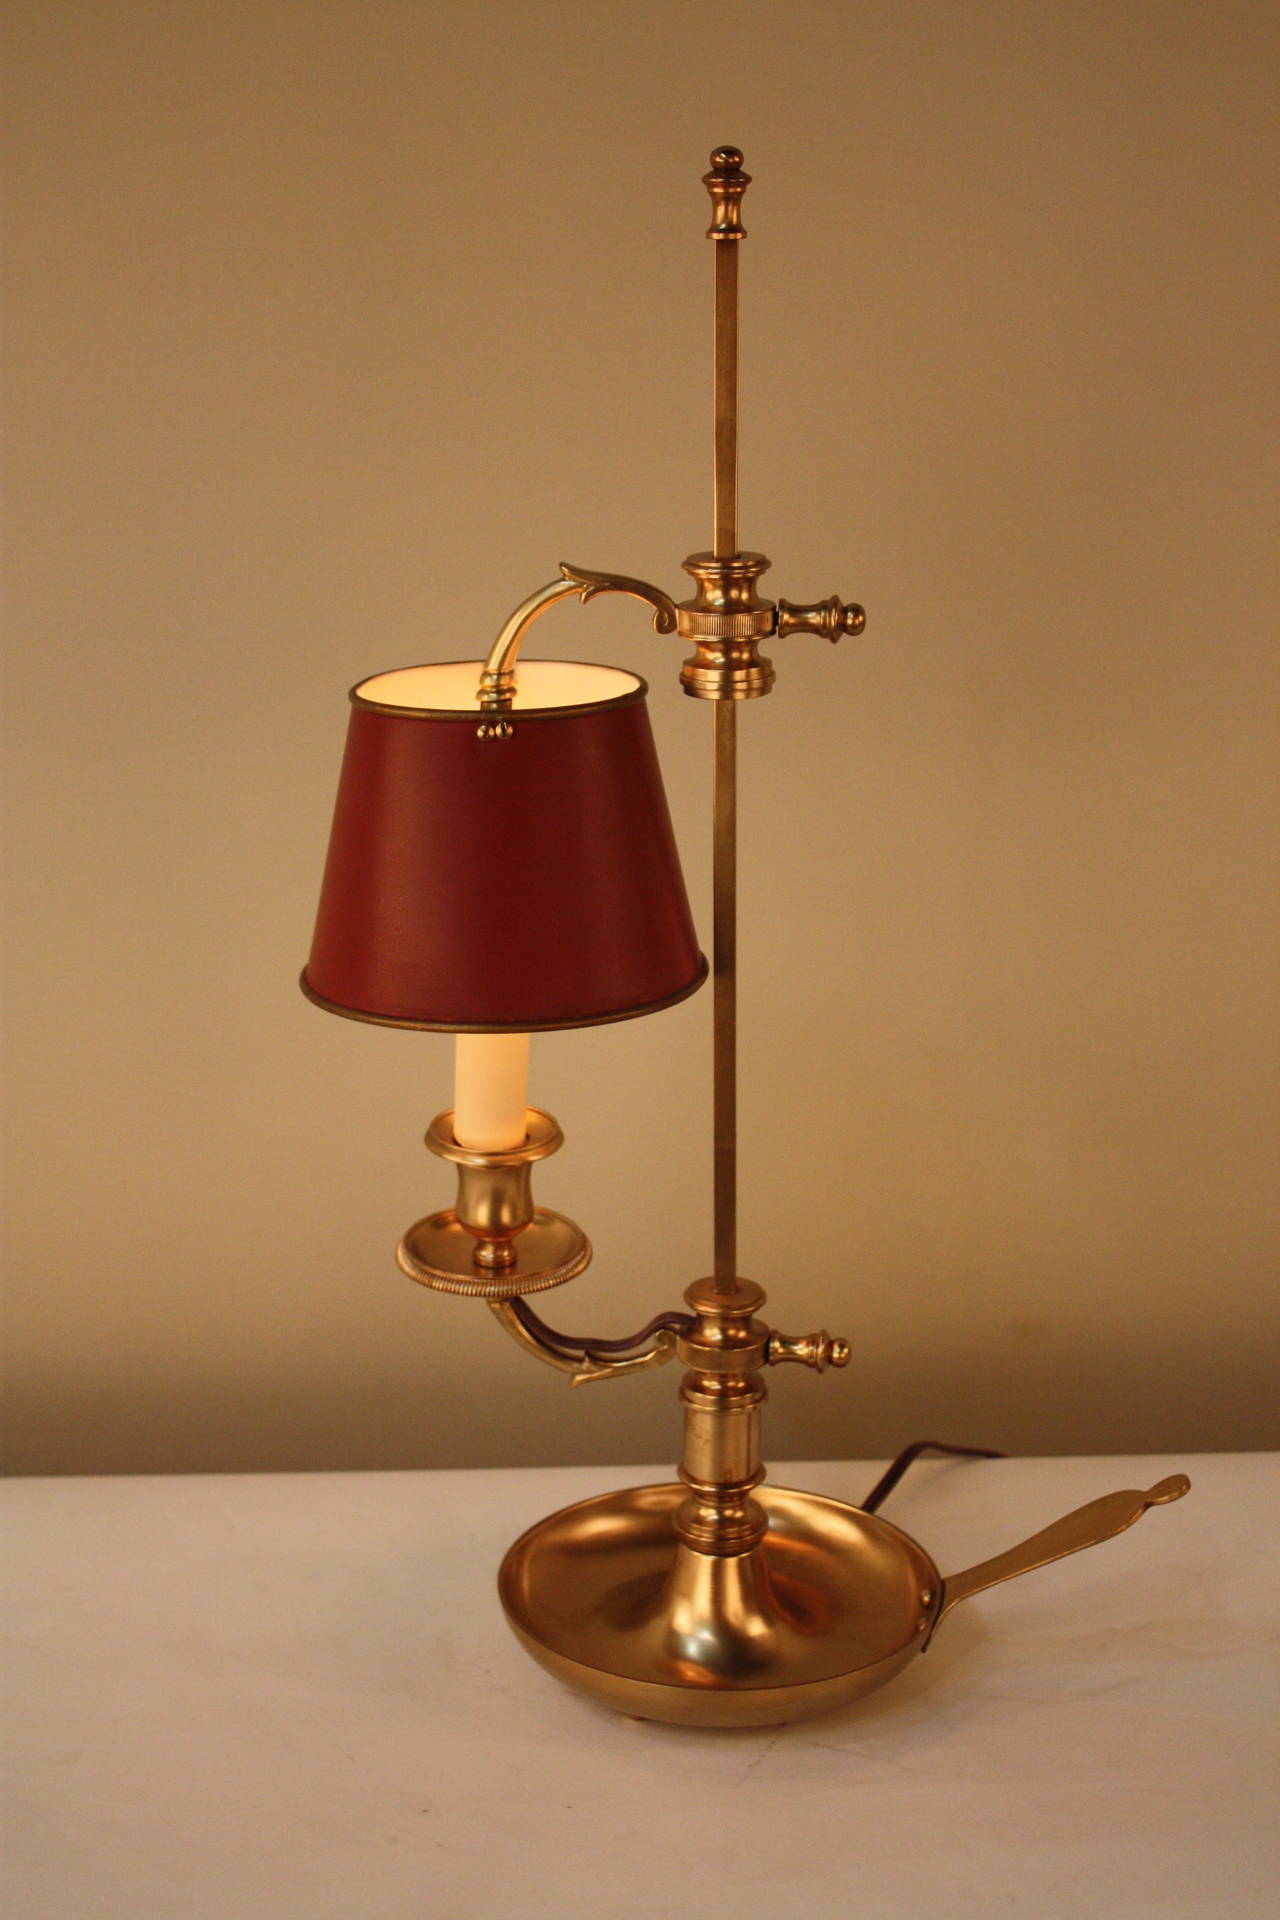 Made in France during the early 20th century, this artisanally crafted table lamp is truly beautiful. Made of gorgeous bronze in the Empire style, this single-light table lamp features adjustable height and a hand-painted shade creating an elegant